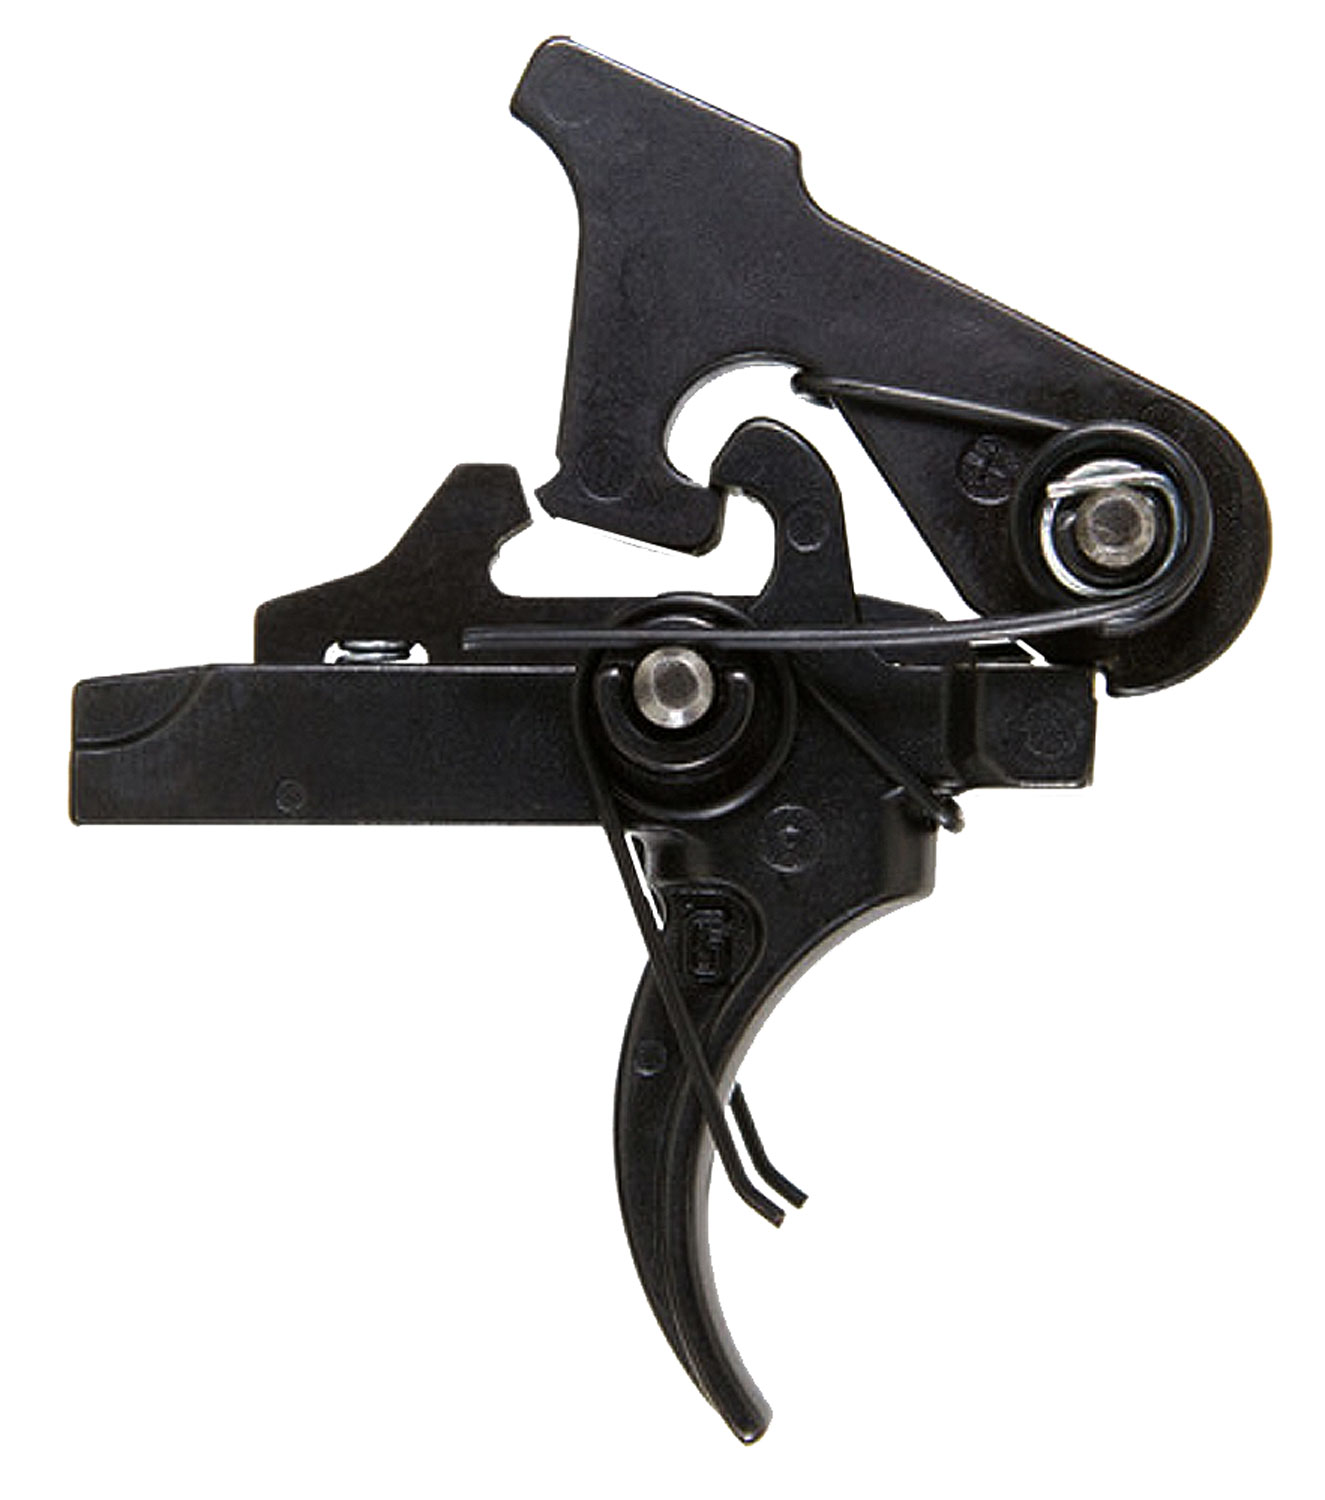 Geissele Automatics 05145 G2s  Two-Stage Curved Trigger with 4.25-4.75 lbs Draw Weight & Black Oxide Finish for AR-15/AR-10